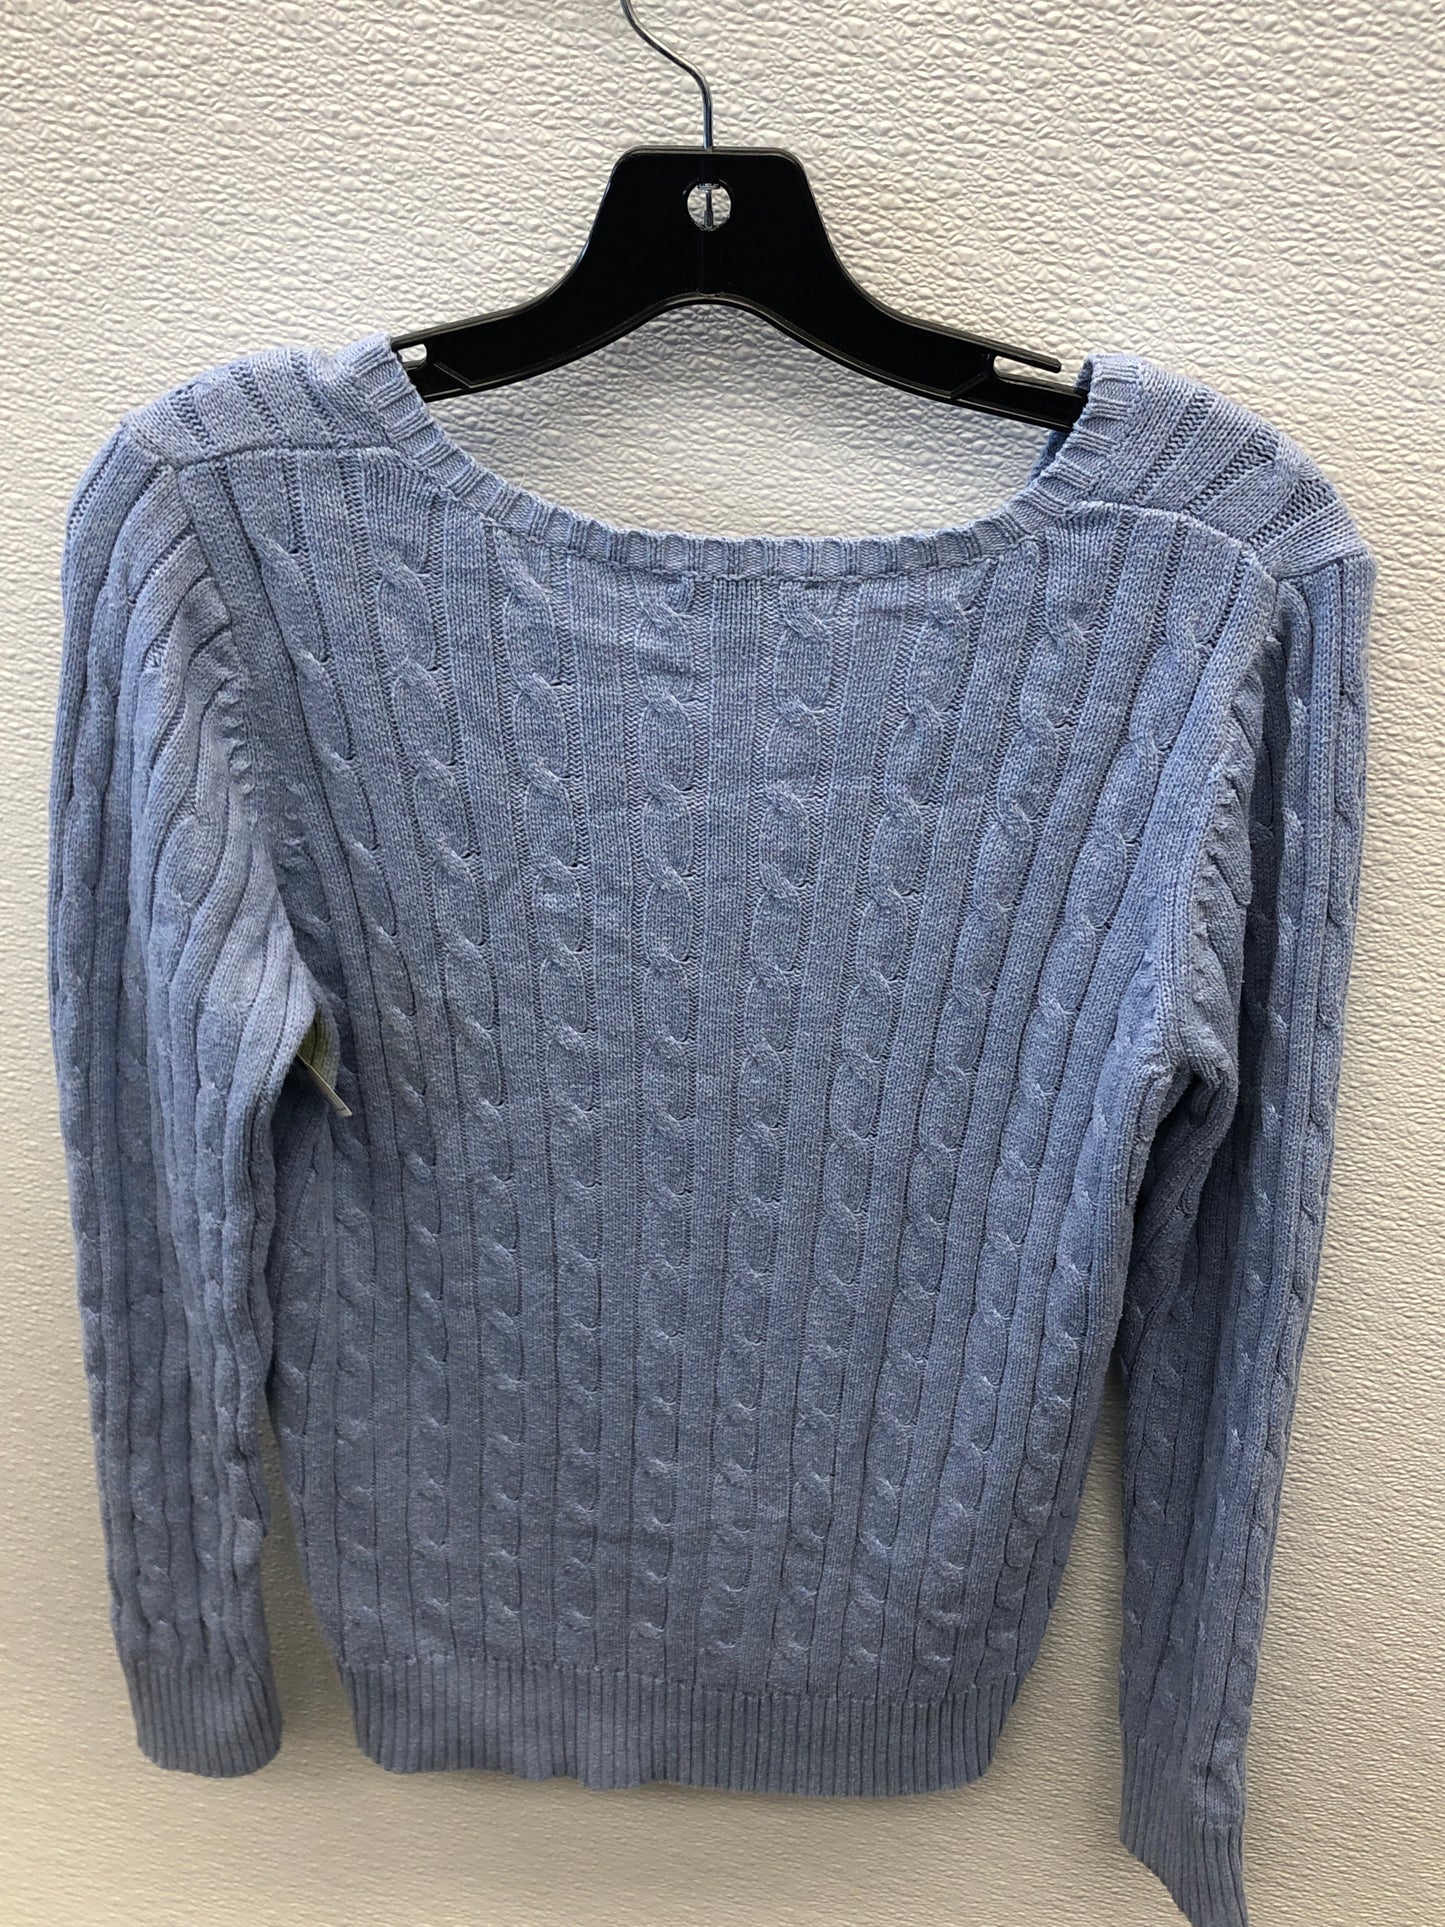 Sweater By St Johns Bay  Size: L